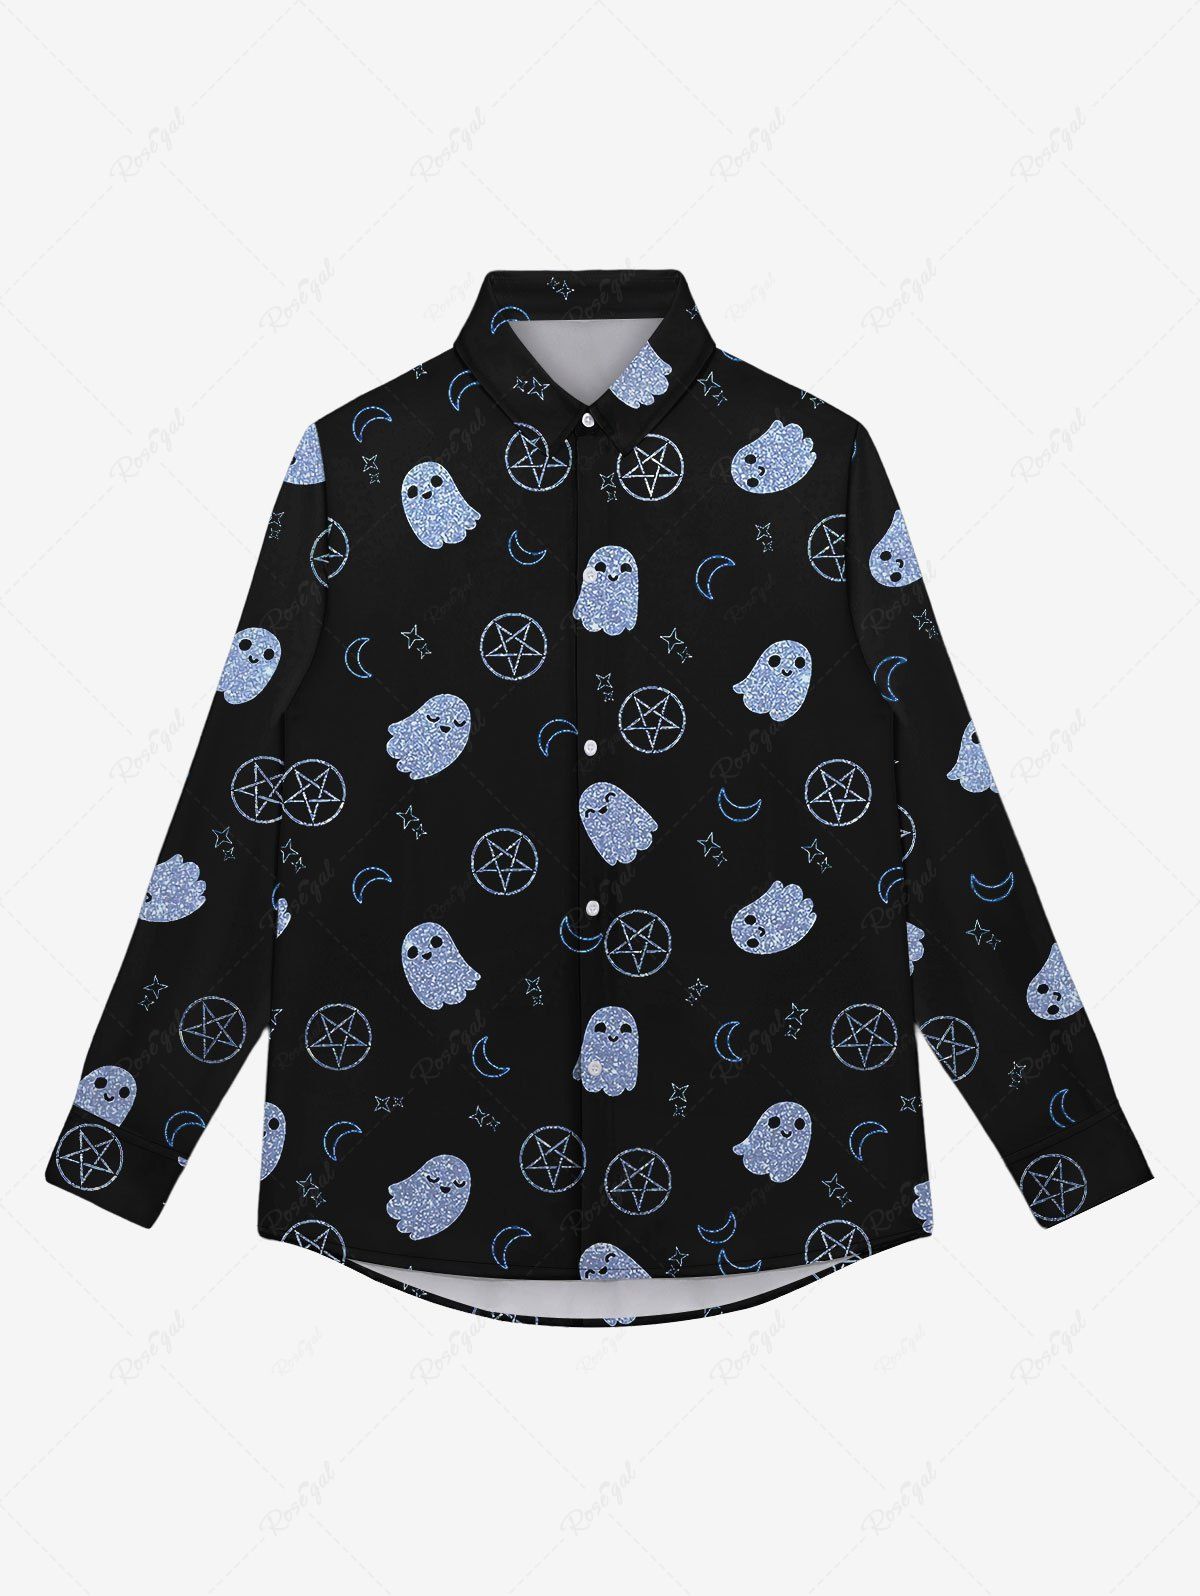 Unique Gothic Turn-down Collar Cute Ghost Moon Star Printed Buttons Shirt For Men  